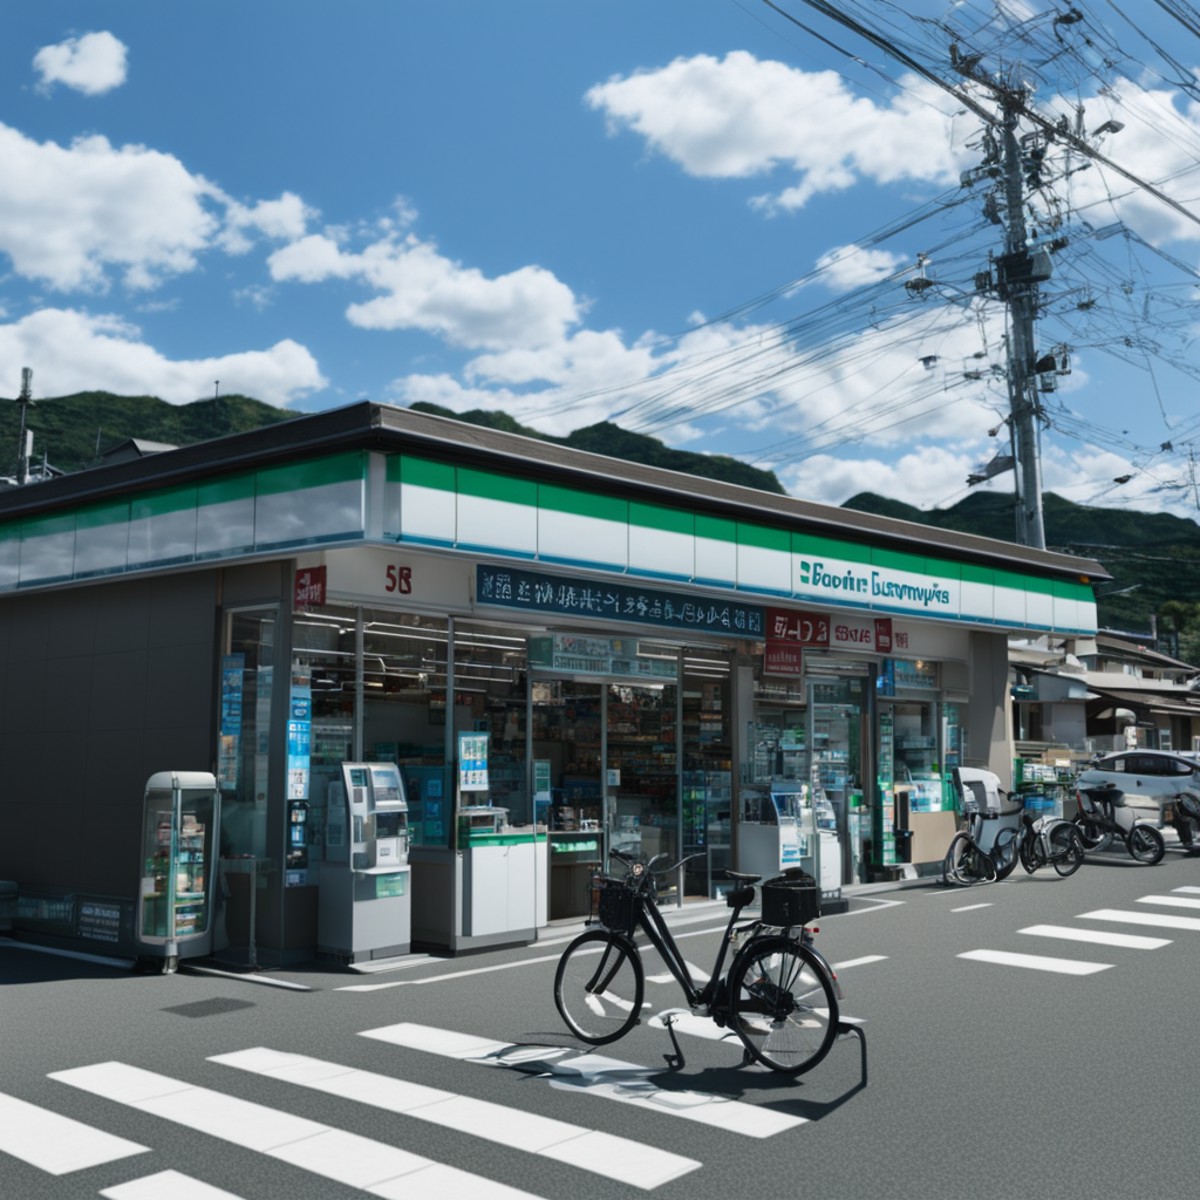 cinematic still best quality, ultra-detailed,
famima, konbini, scenery, storefront, outdoors, scenery, bicycle, sky, groun...